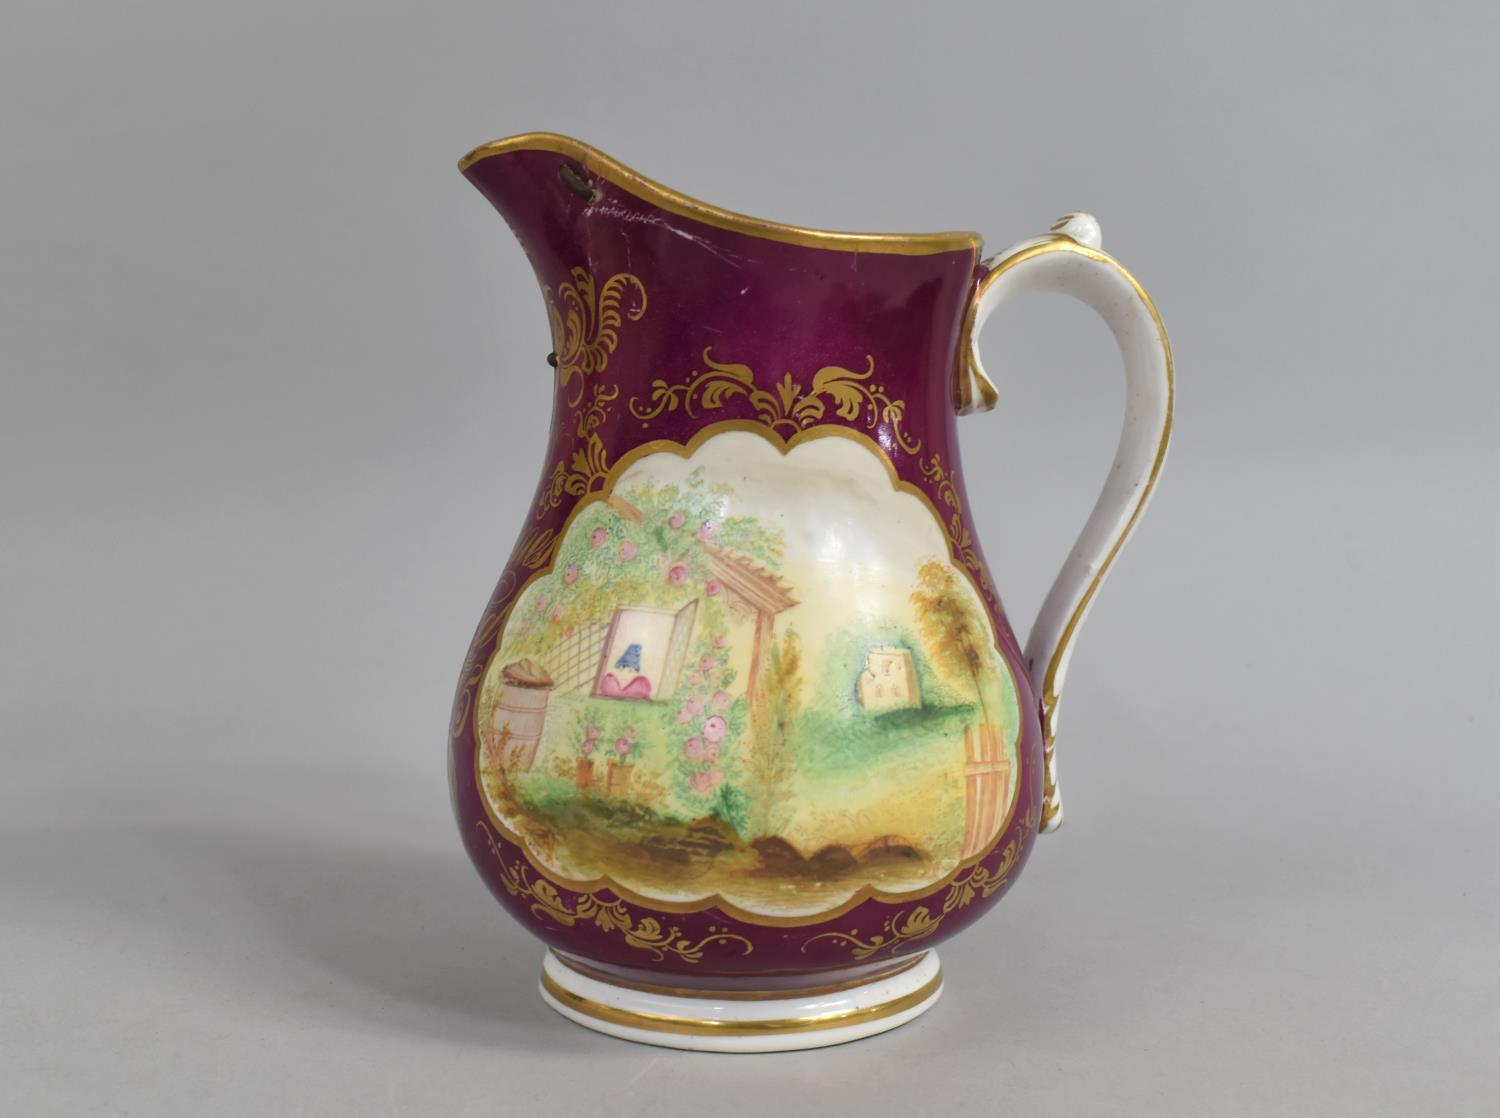 A 19th Century Porcelain Jug with Hand Painted Cartouches on Puce Ground, Inscribed in Gilt James